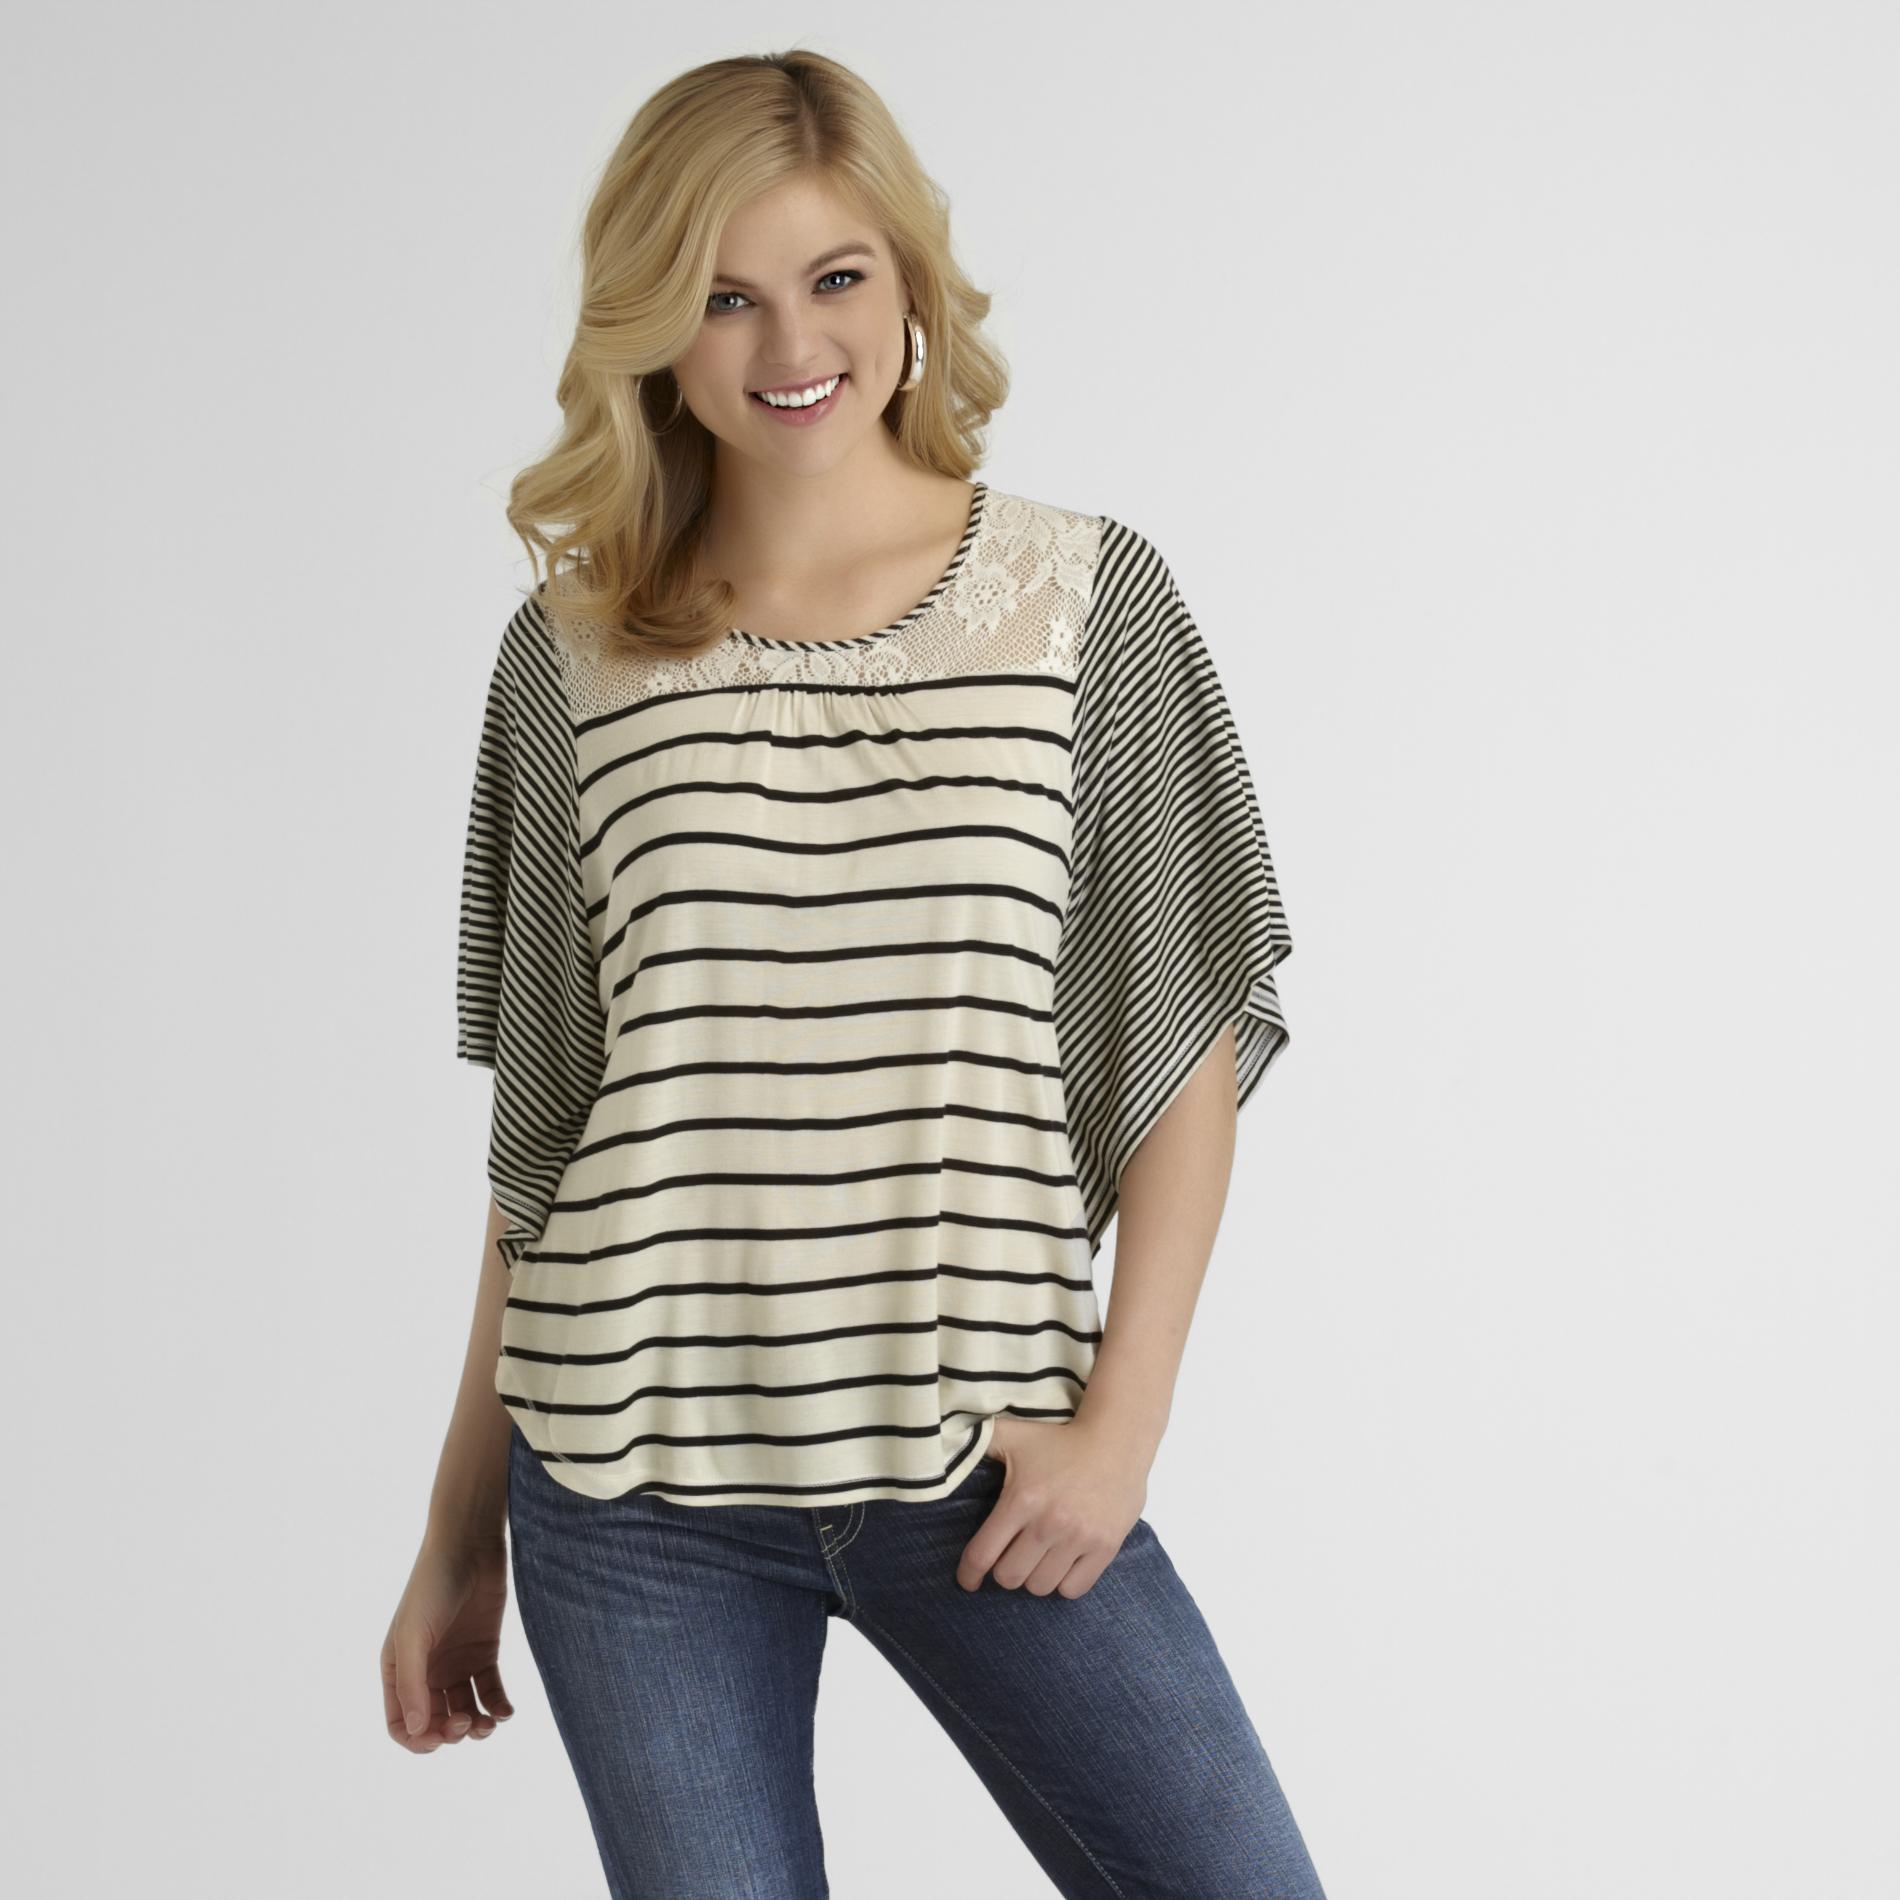 Route 66 Women's Circle Top - Striped